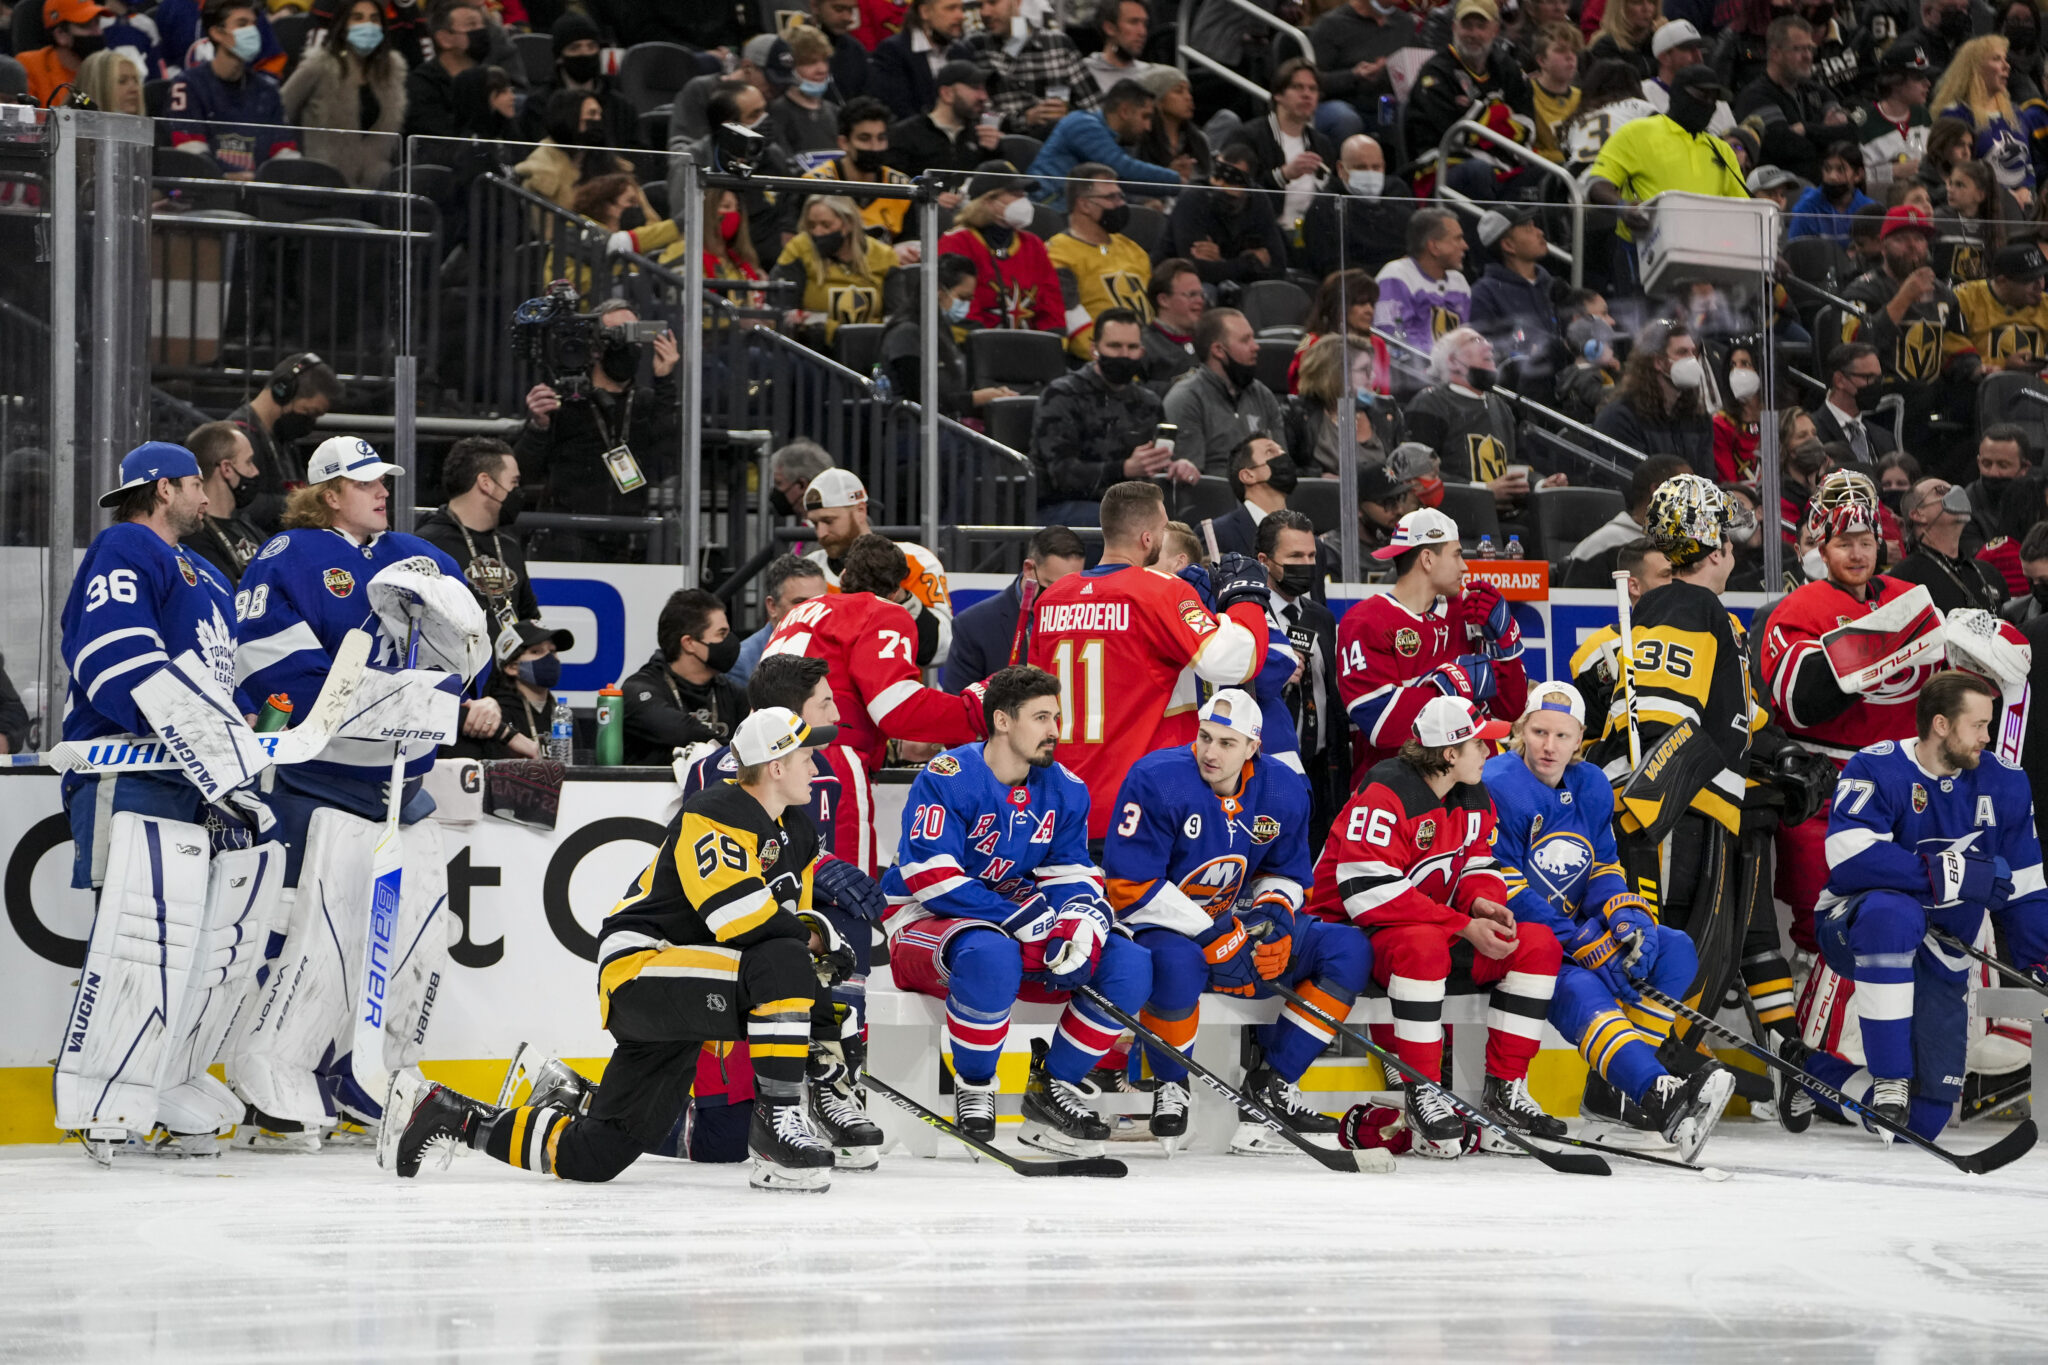 How to watch NHL AllStar Game, plus Winter Classic and other events